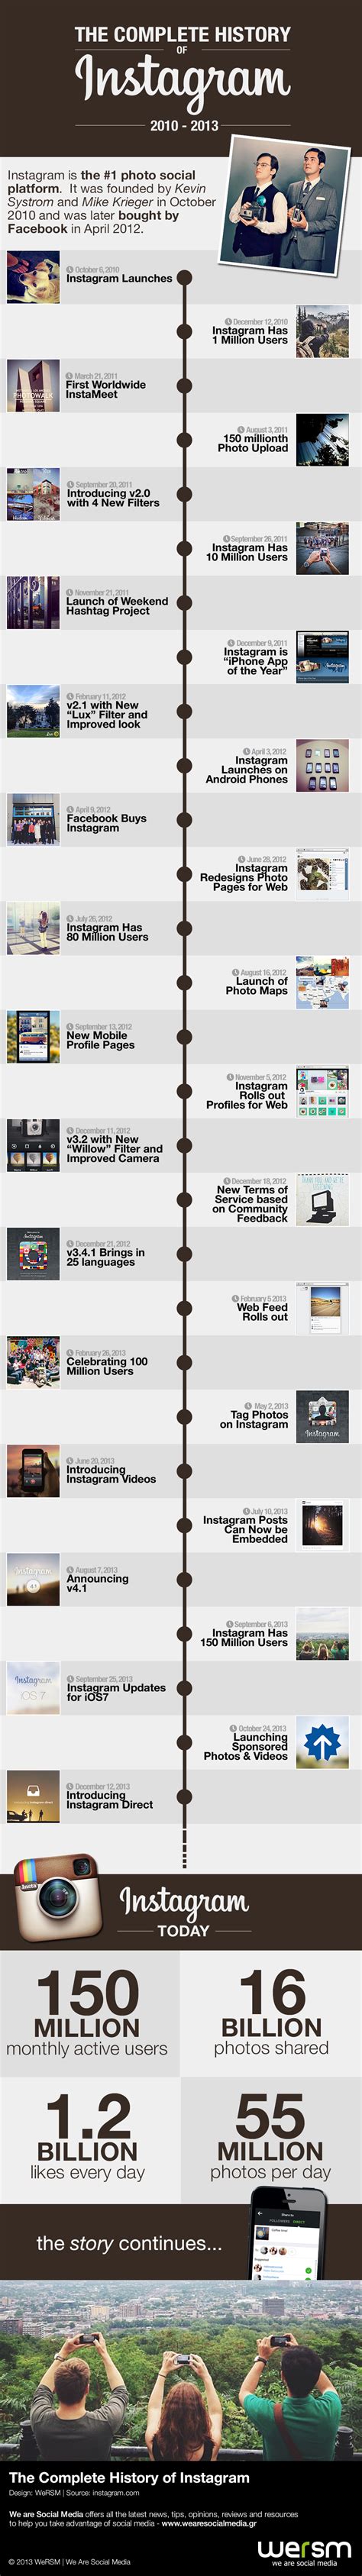 Timeline Of Instagram From 2010 To Present Infographic Digital